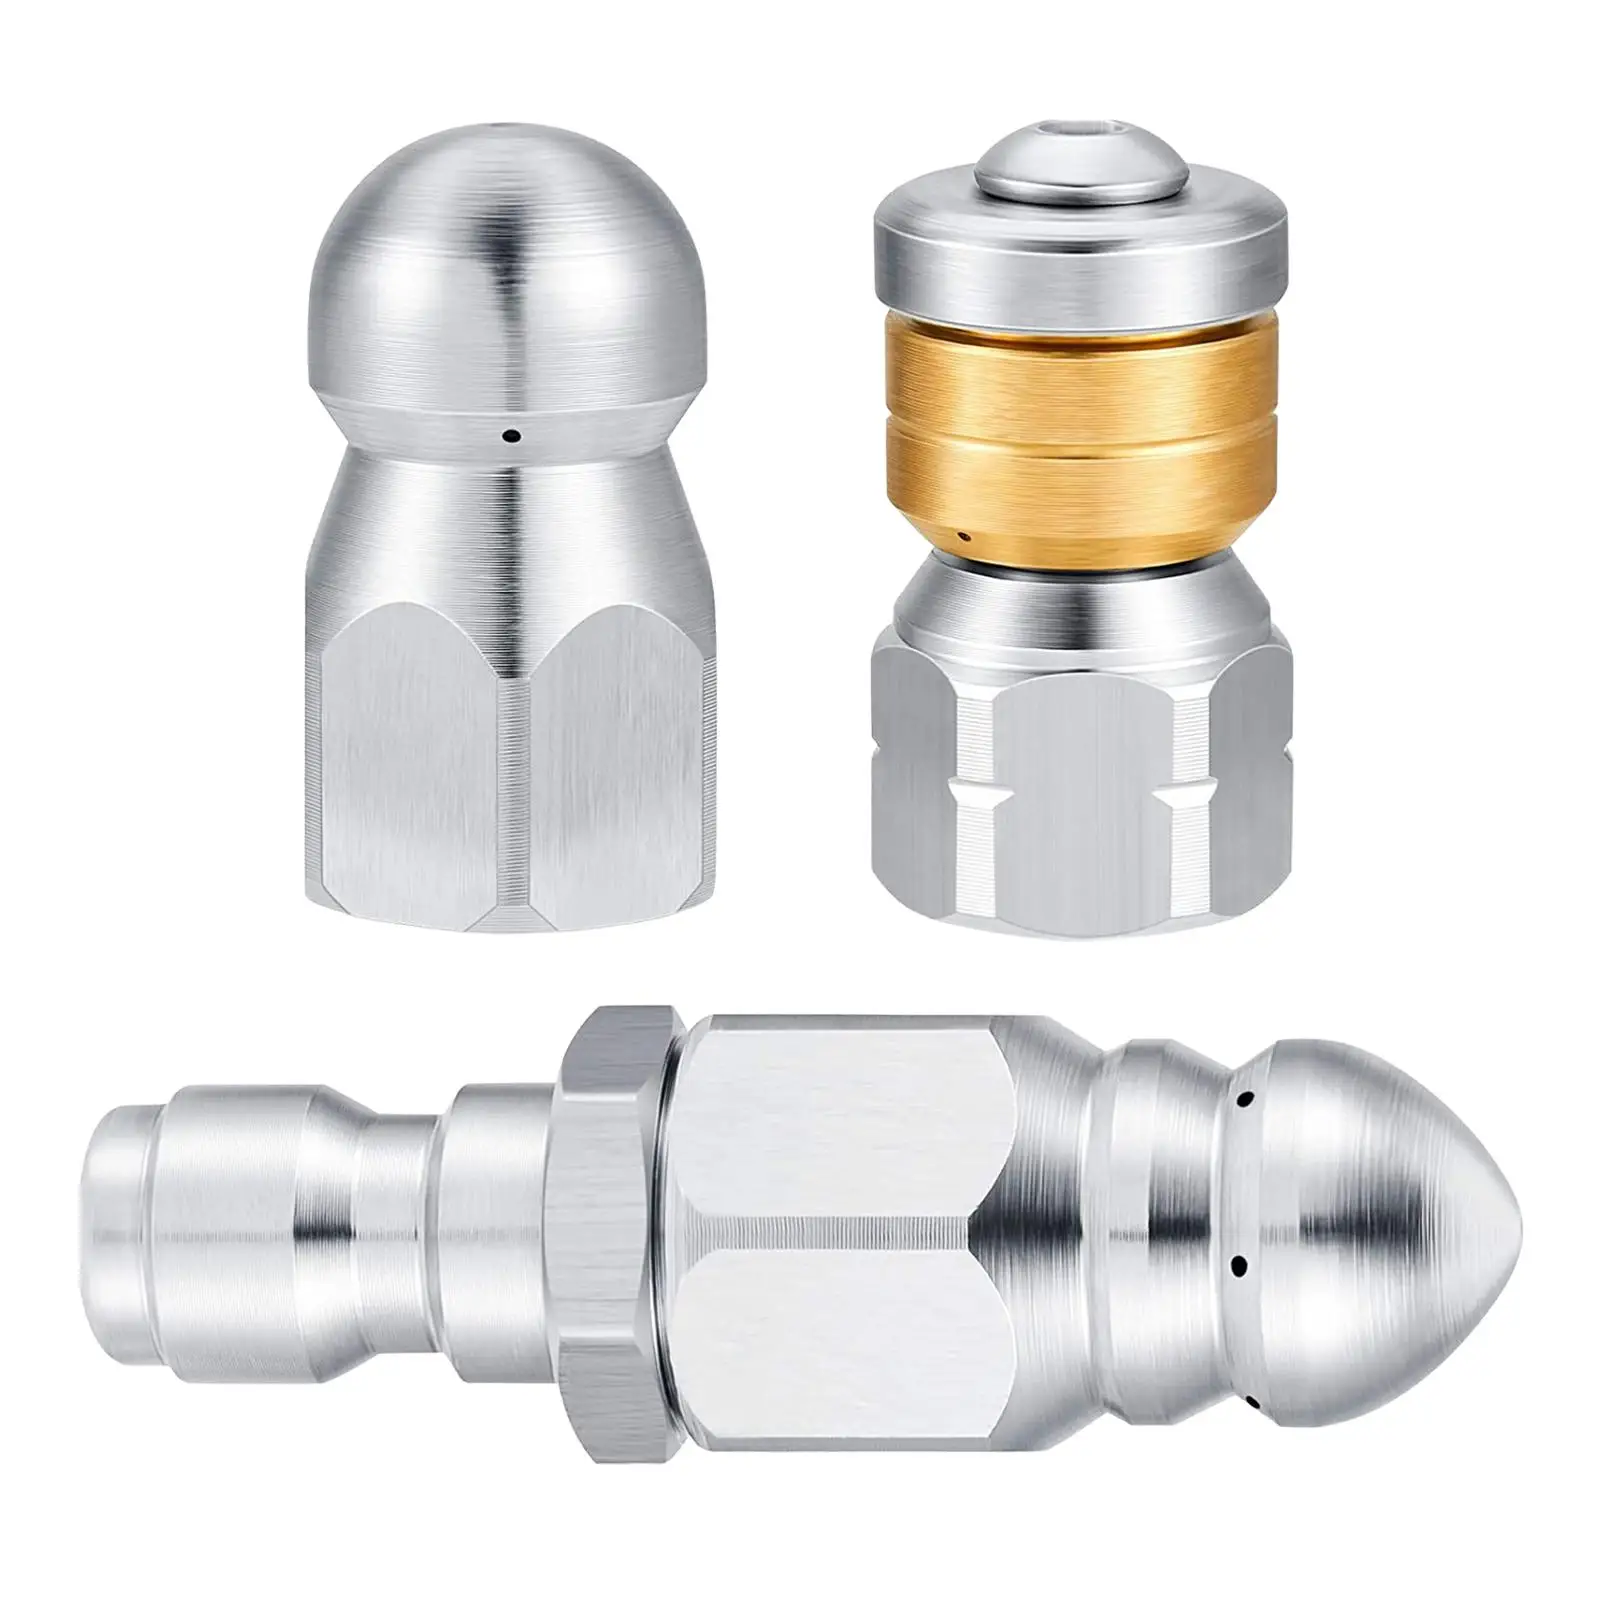 3Pcs Sewer Jetter Nozzle Stainless Steel Rotating Button Nose Sewer Jetting Nozzle for Pressure Washer Drain Jetting Hose